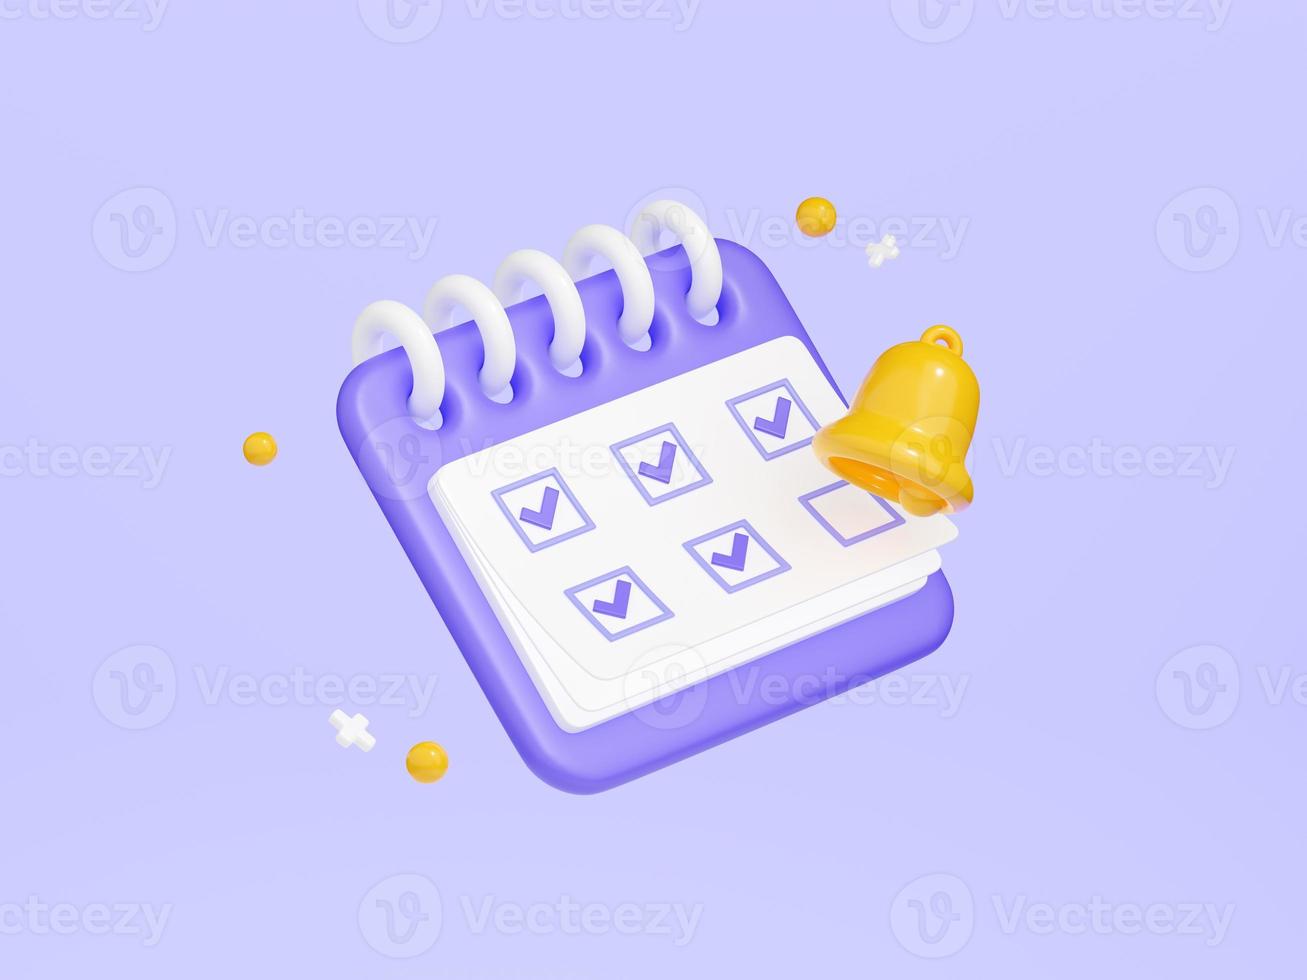 Reminder in calendar 3d render - cute purple calendar with check points marked with tick on white paper and yellow bell. photo